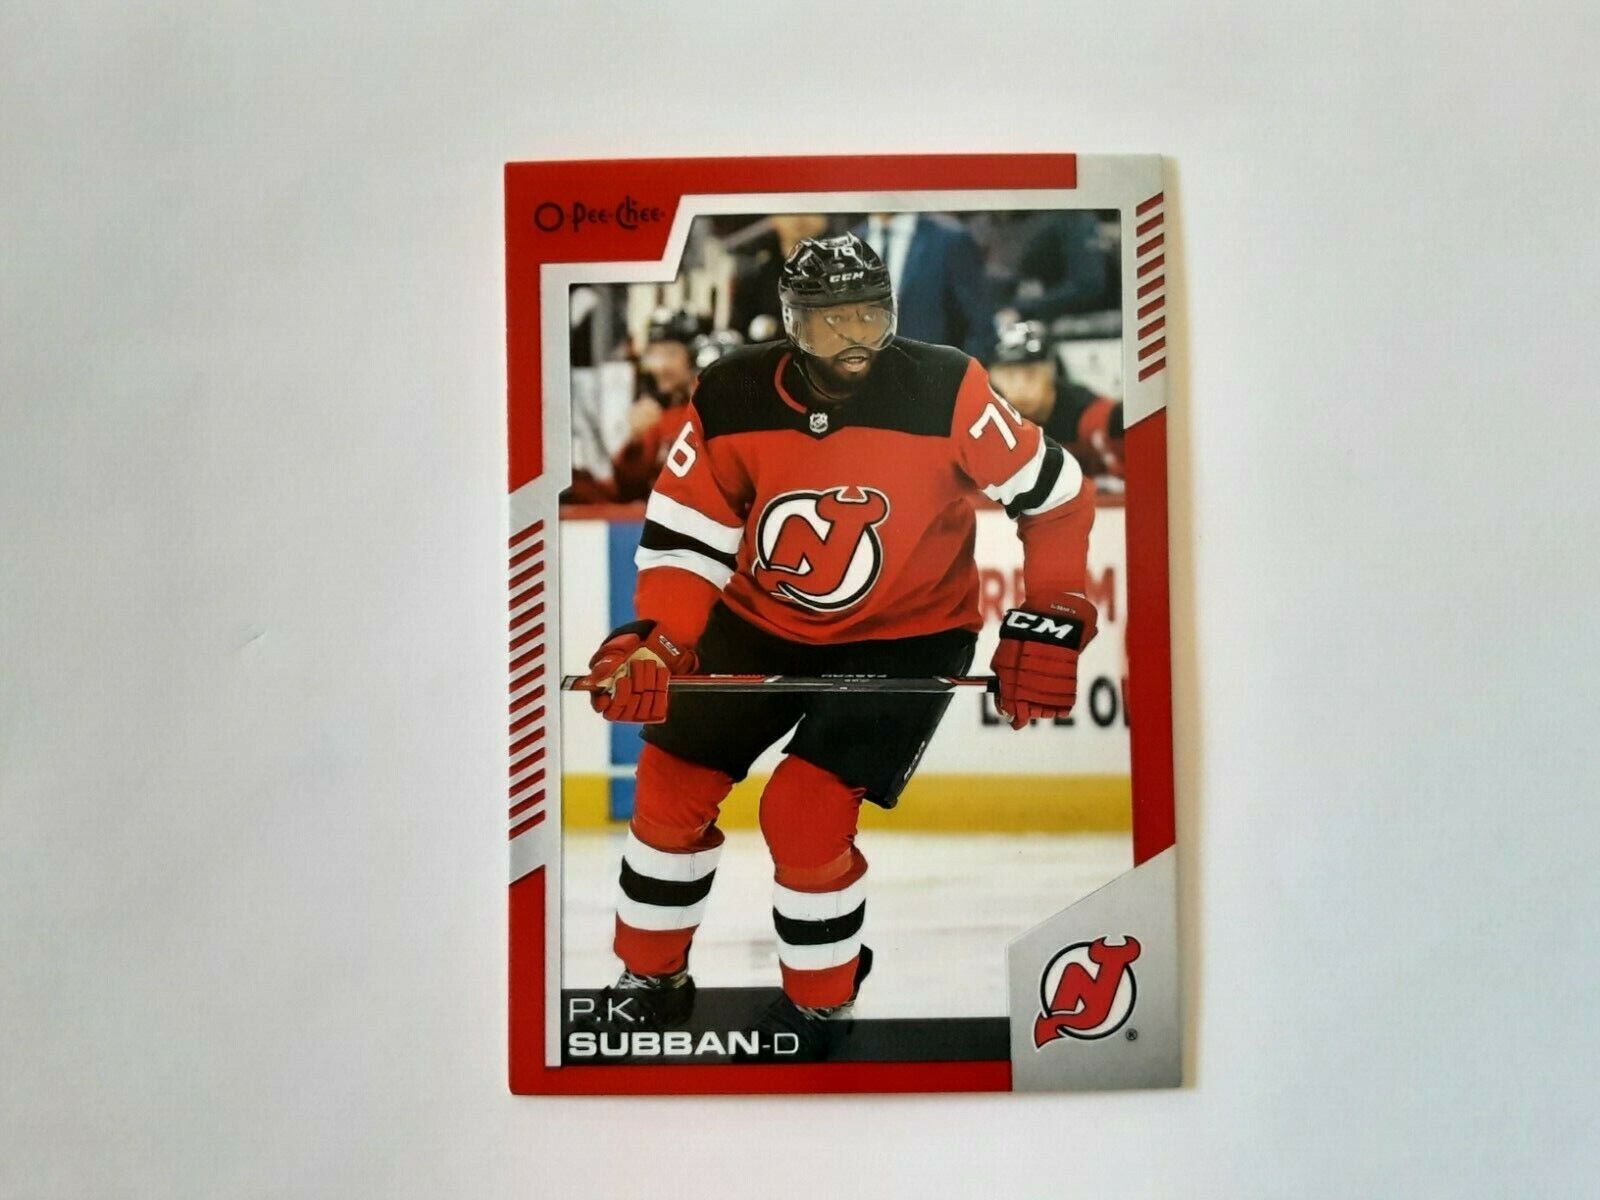 2020-21 UD O-Pee-Chee red borders #47 P.K.SUBBAN